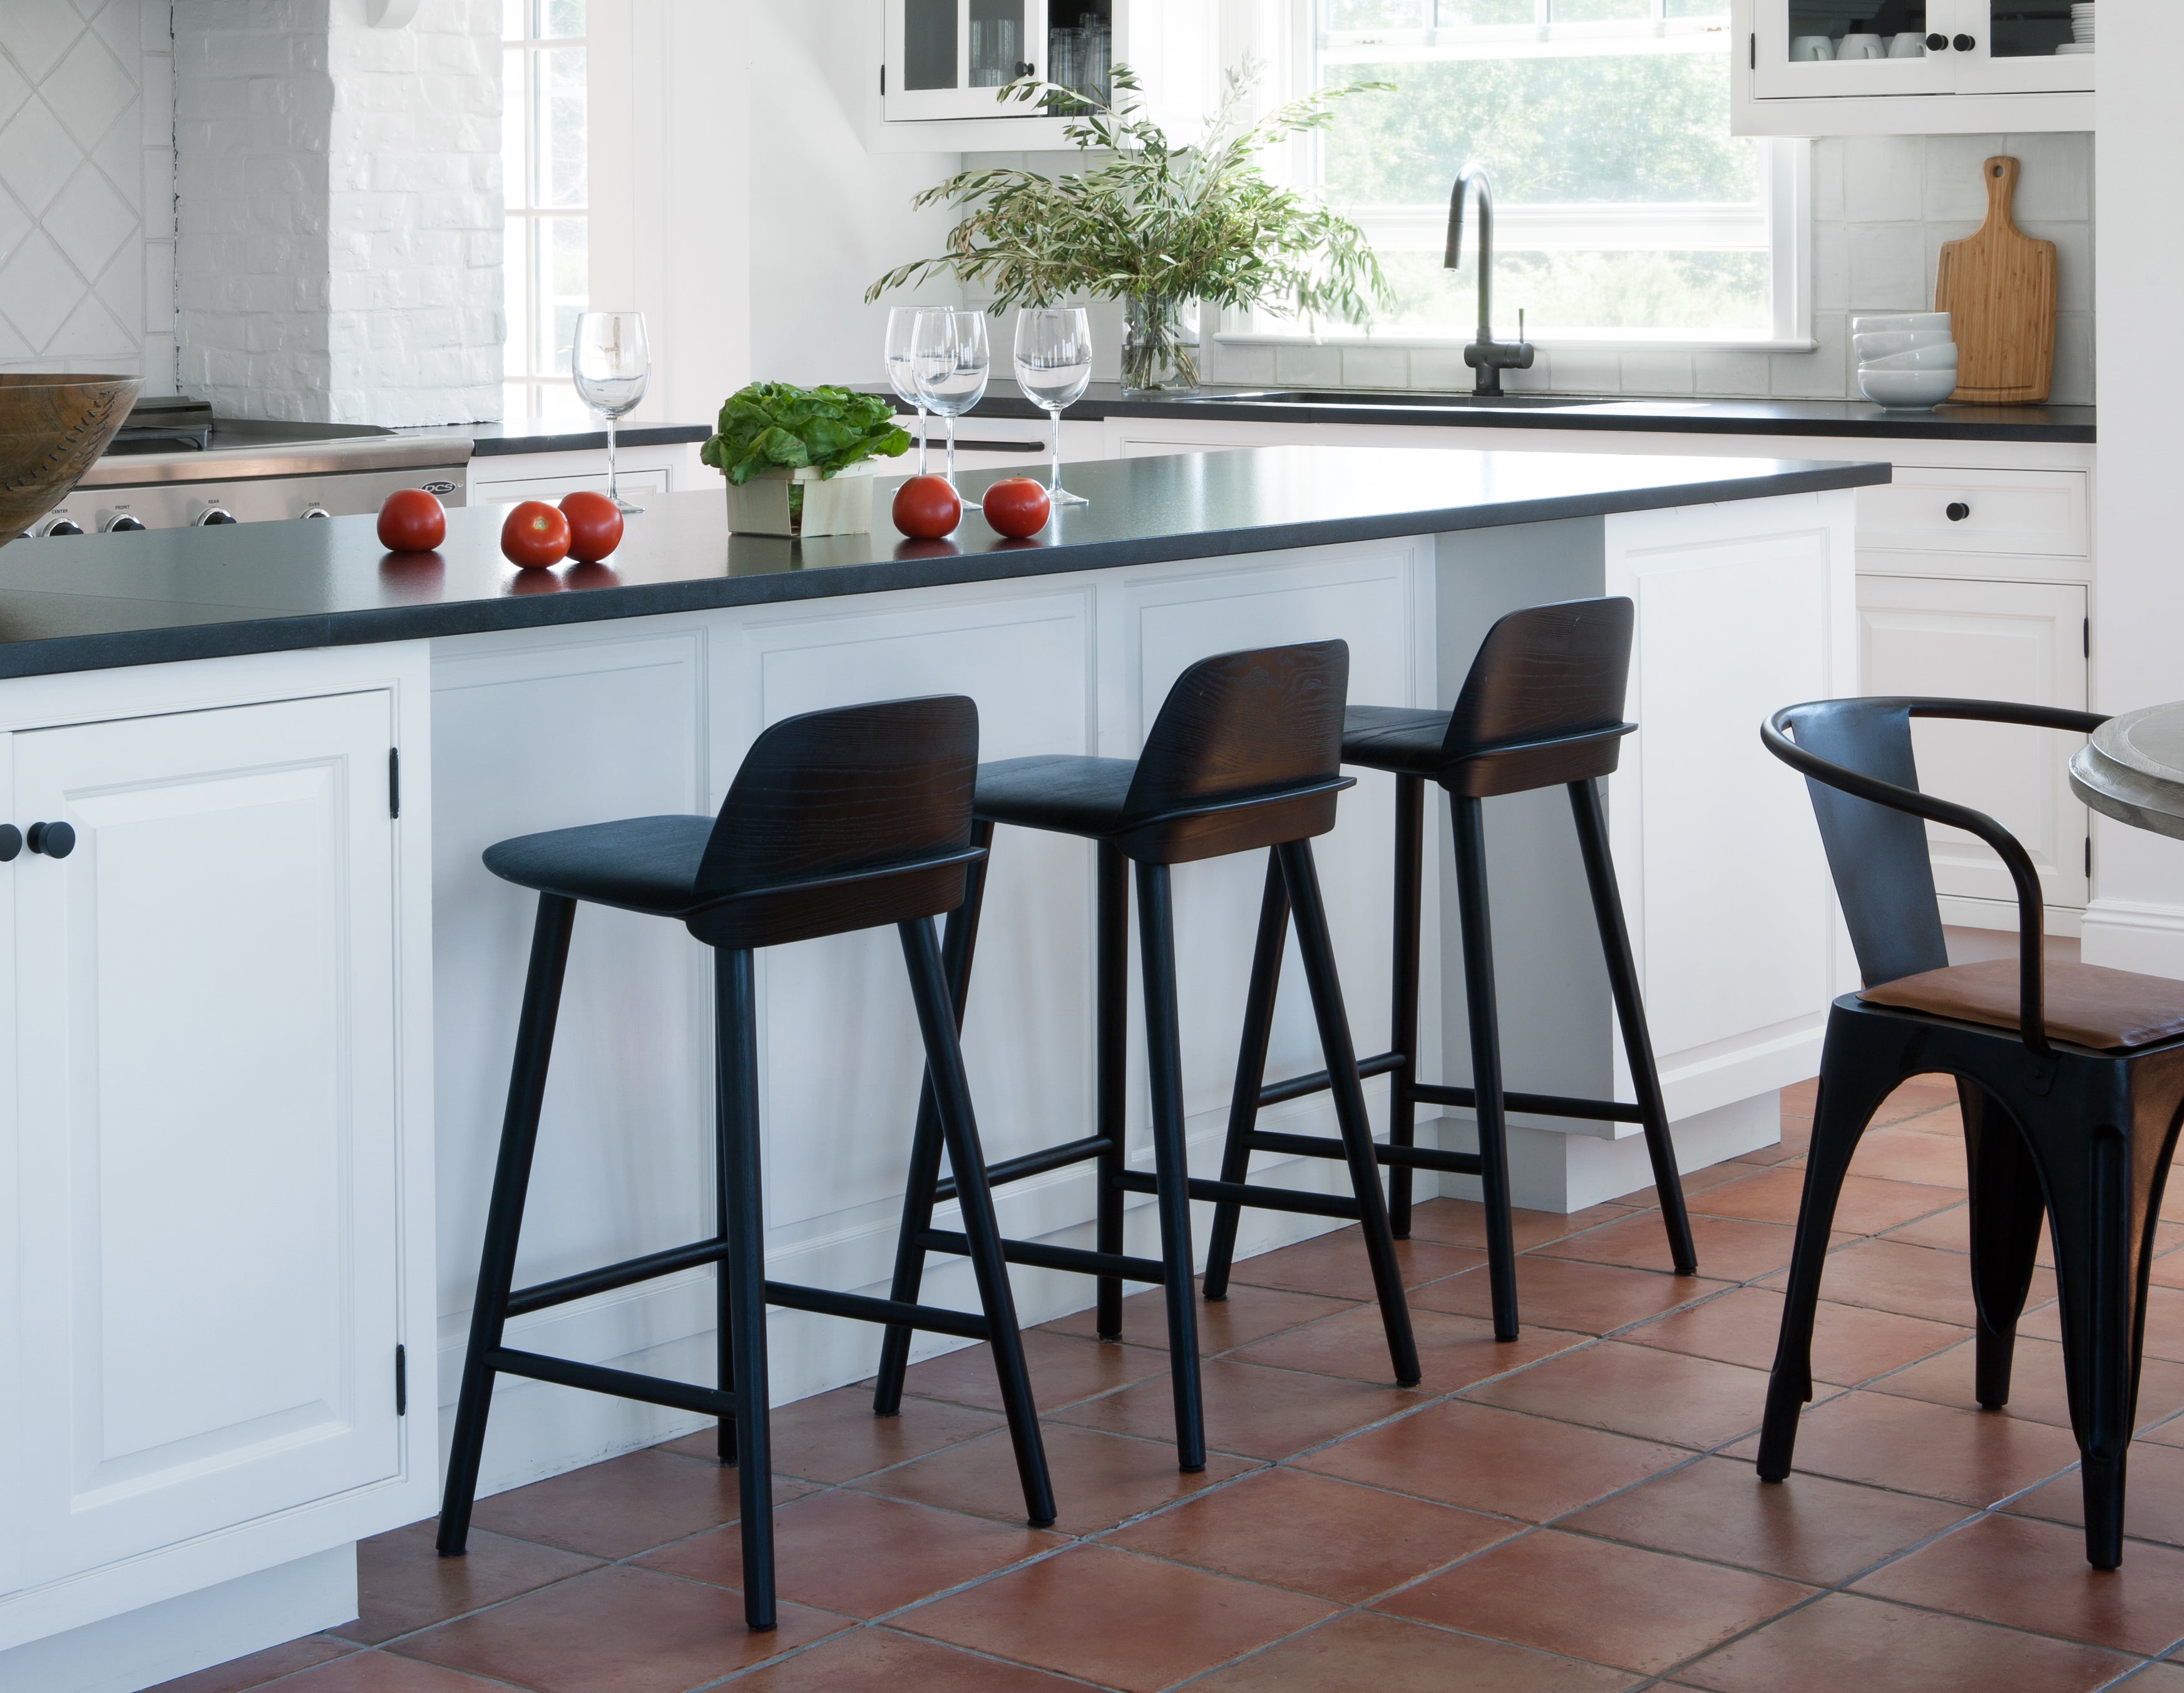 Simple Counter and Bar Stools